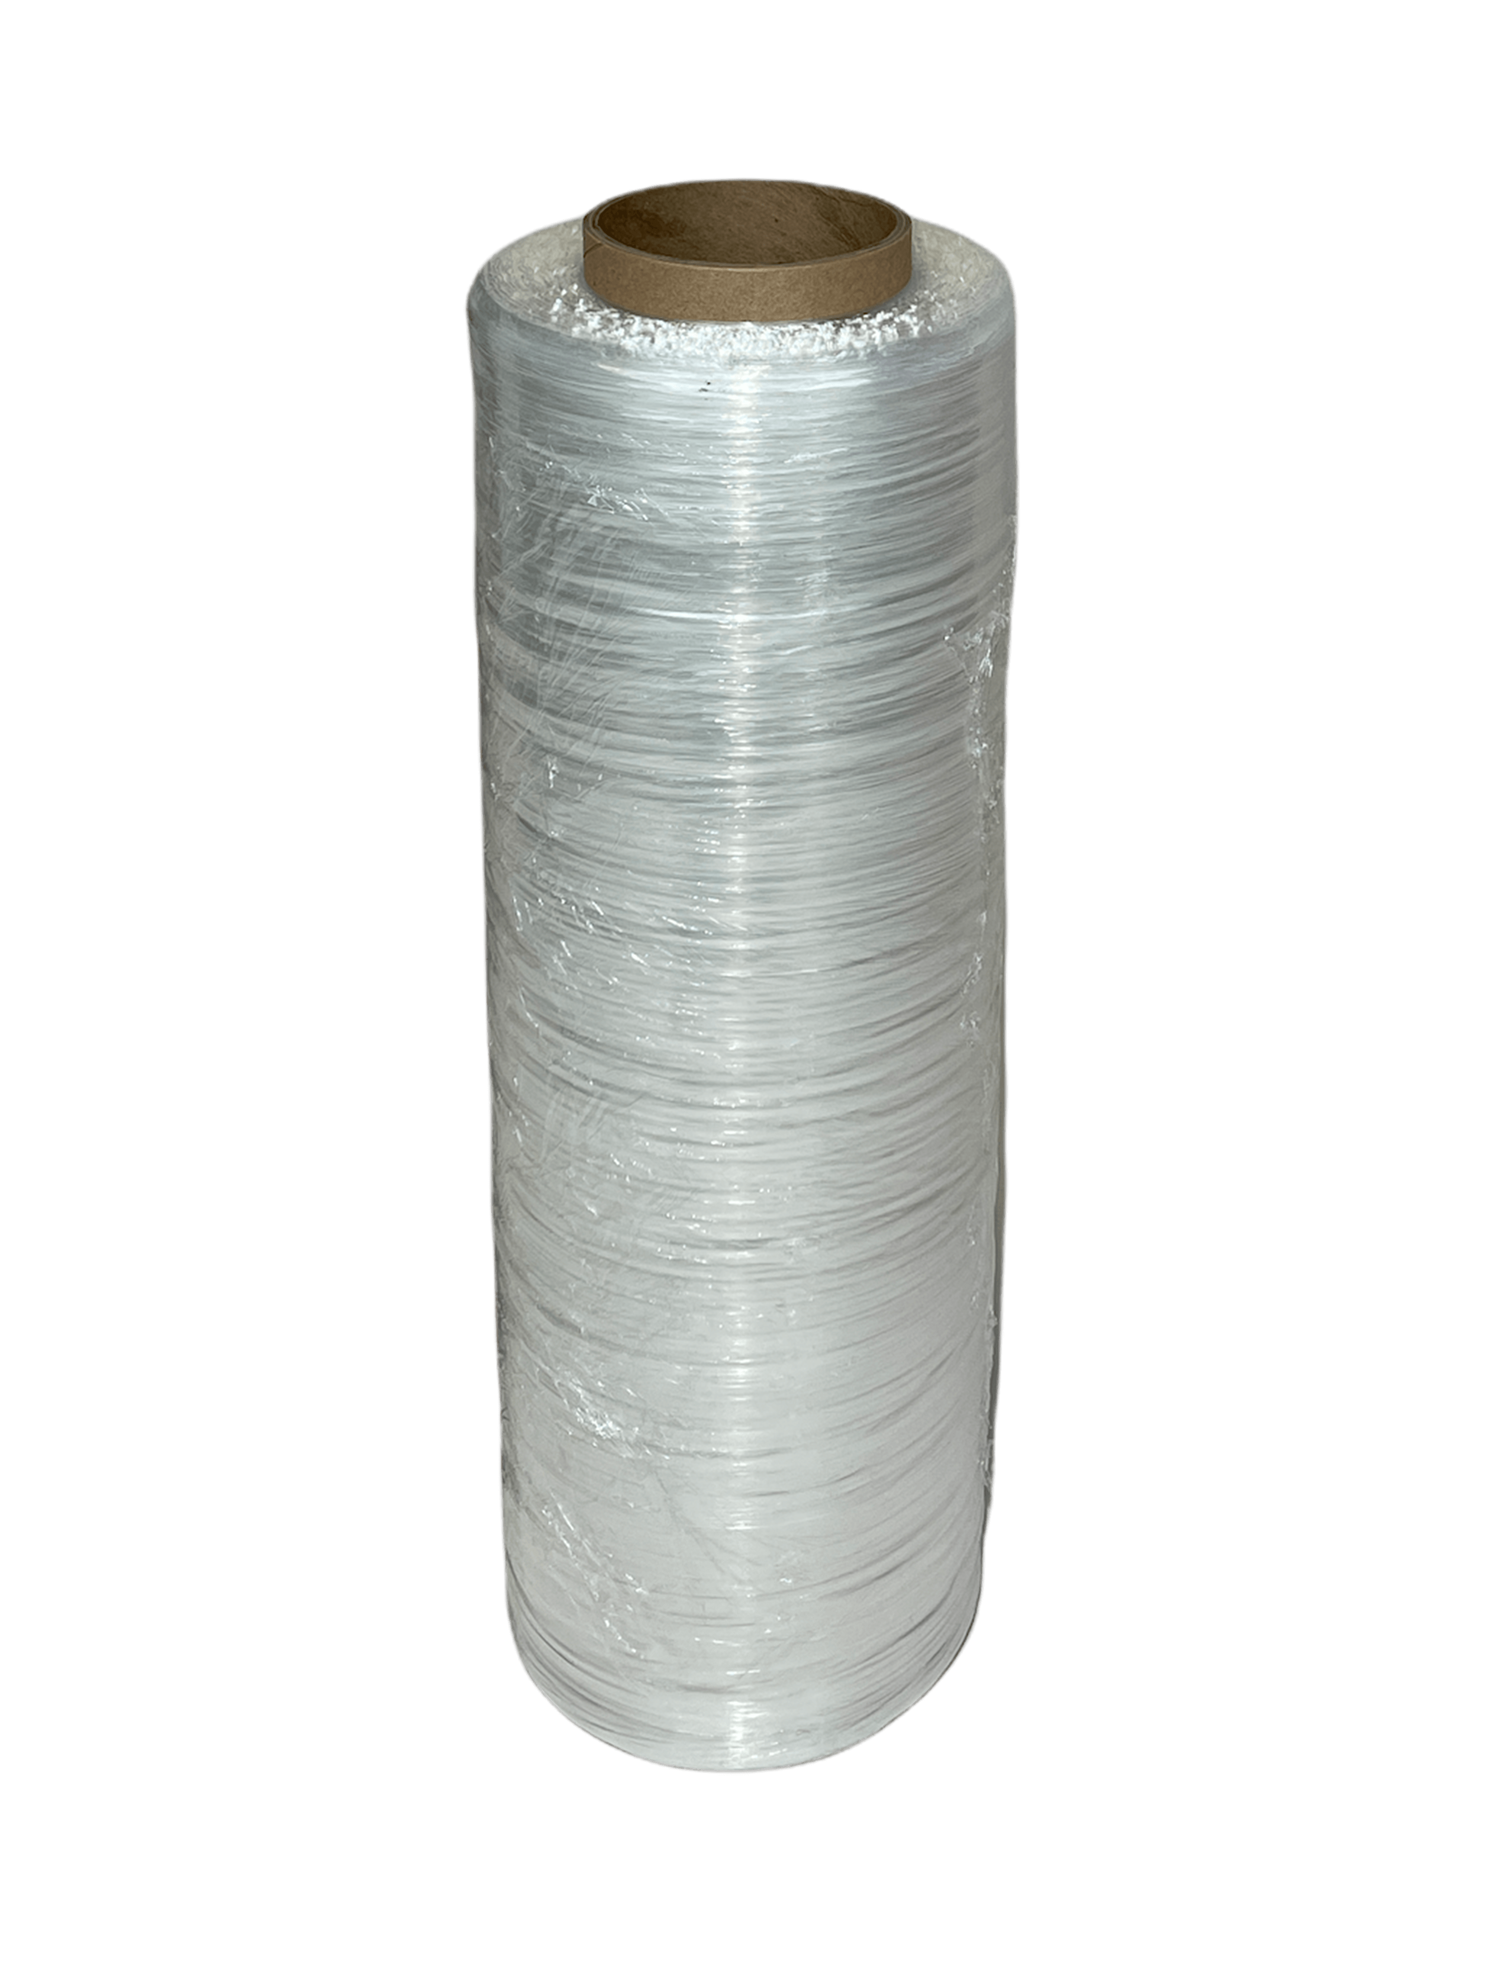 Picture of Torque III Stretch Wrap - Case of 4 Rolls